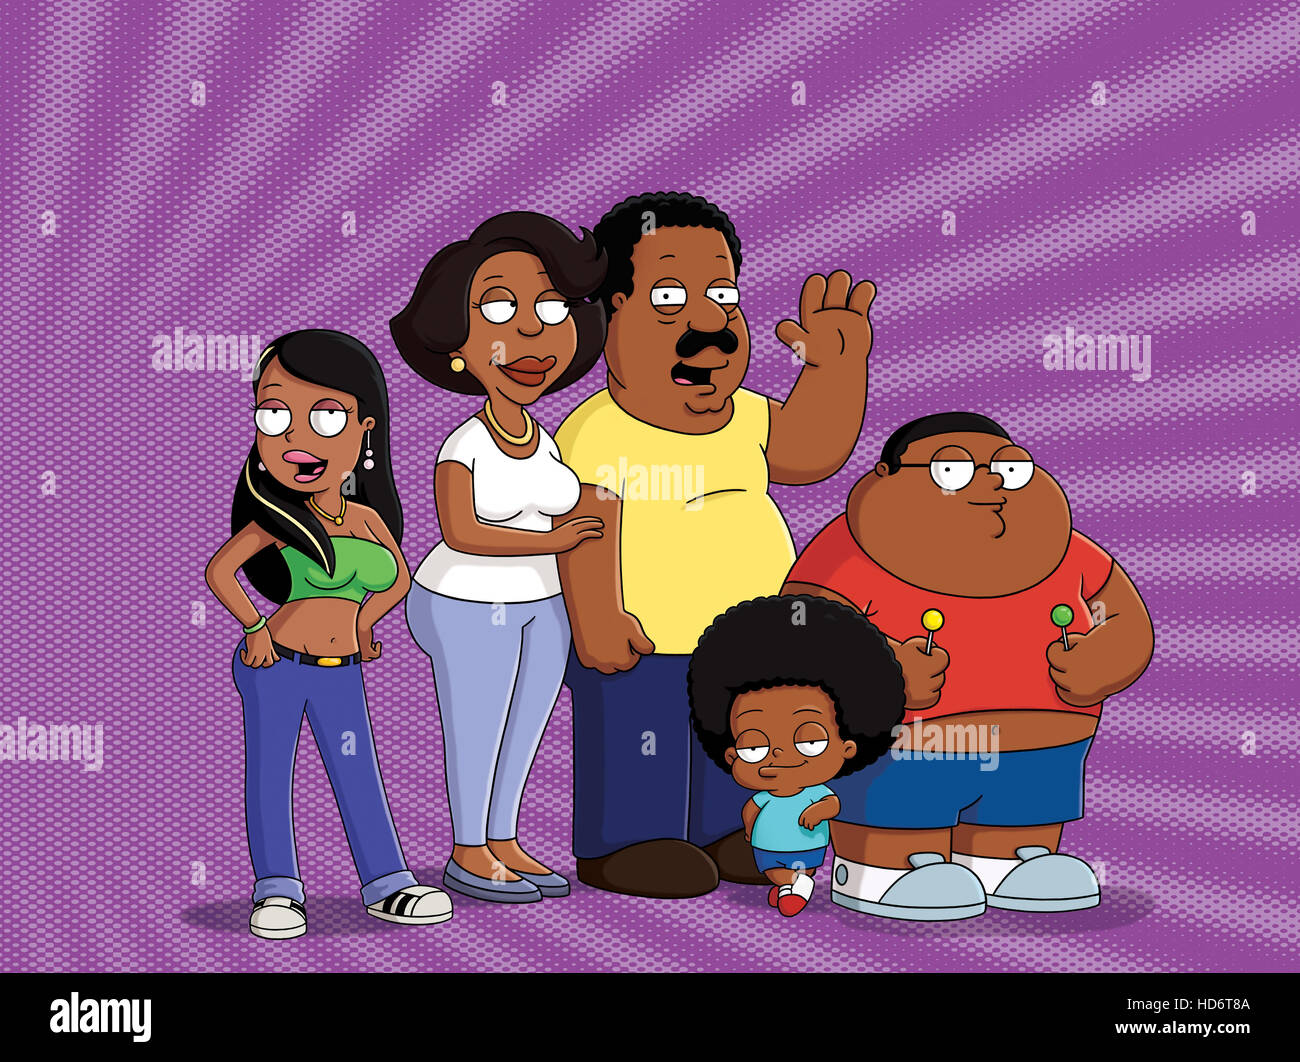 THE CLEVELAND SHOW, (from left): Roberta Tubbs, Donna Tubbs, Cleveland Brown, Rallo Tubbs, Cleveland Brown Jr., (Season 3), Stock Photo